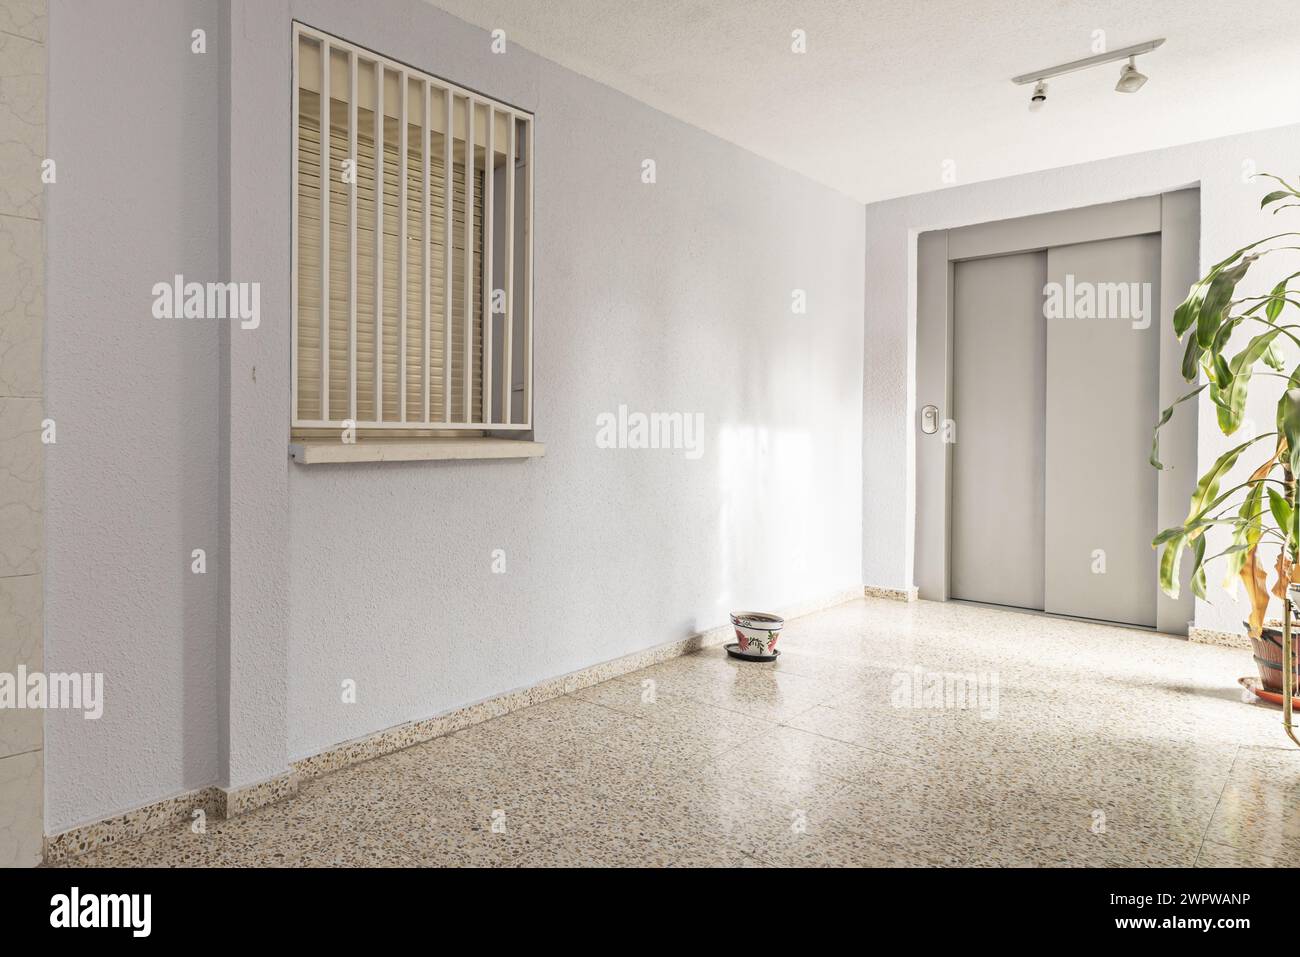 A landing of a residential building with a closed elevator door and some floors Stock Photo